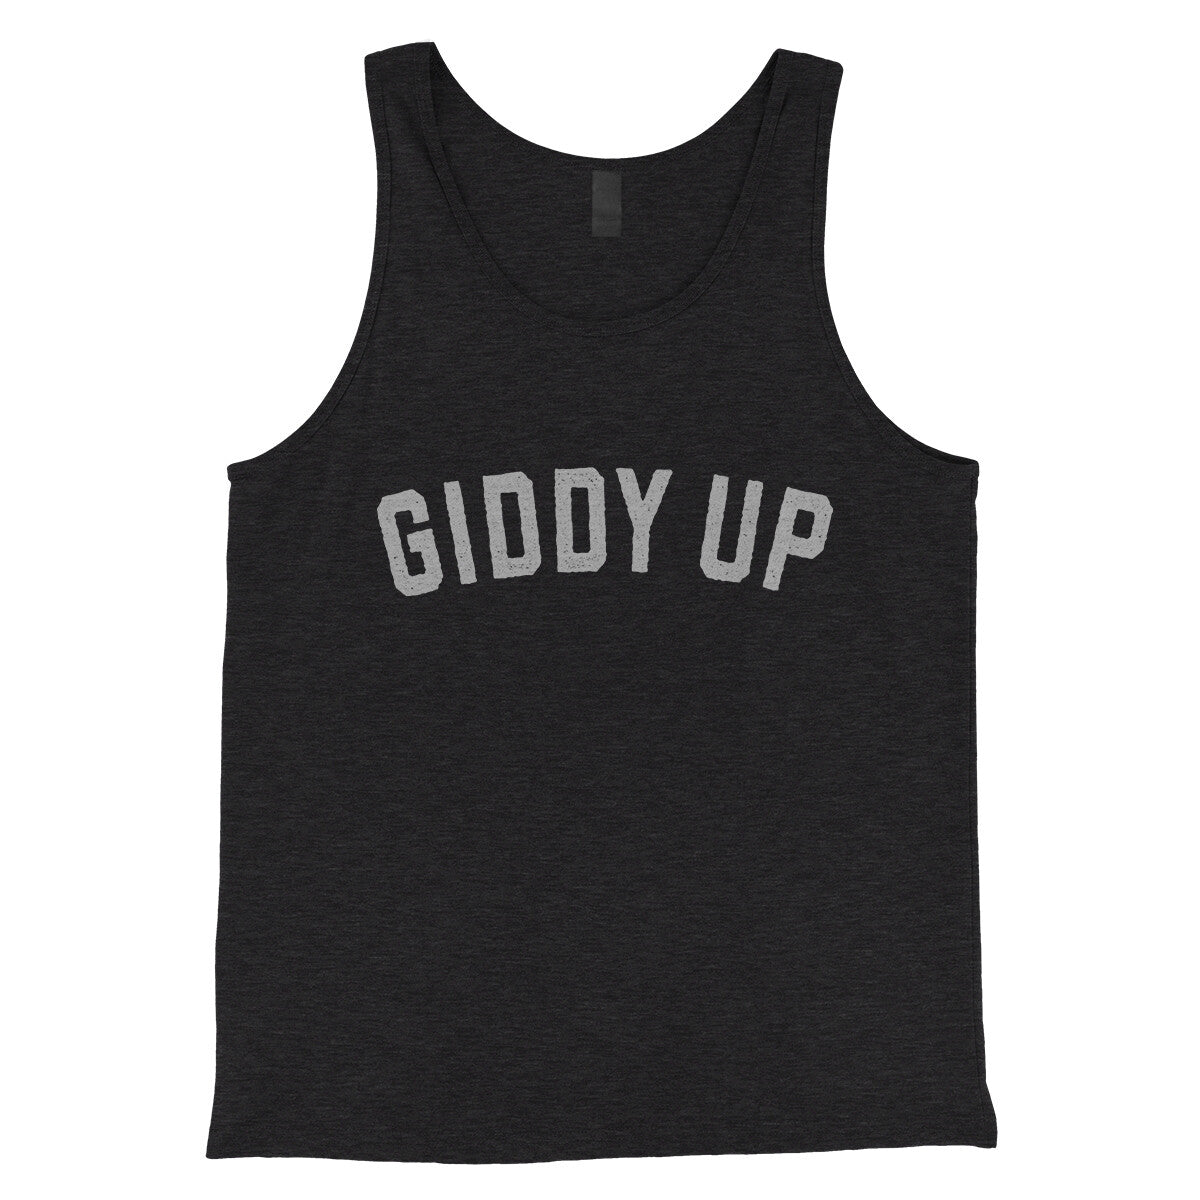 Giddy Up in Charcoal Black TriBlend Color